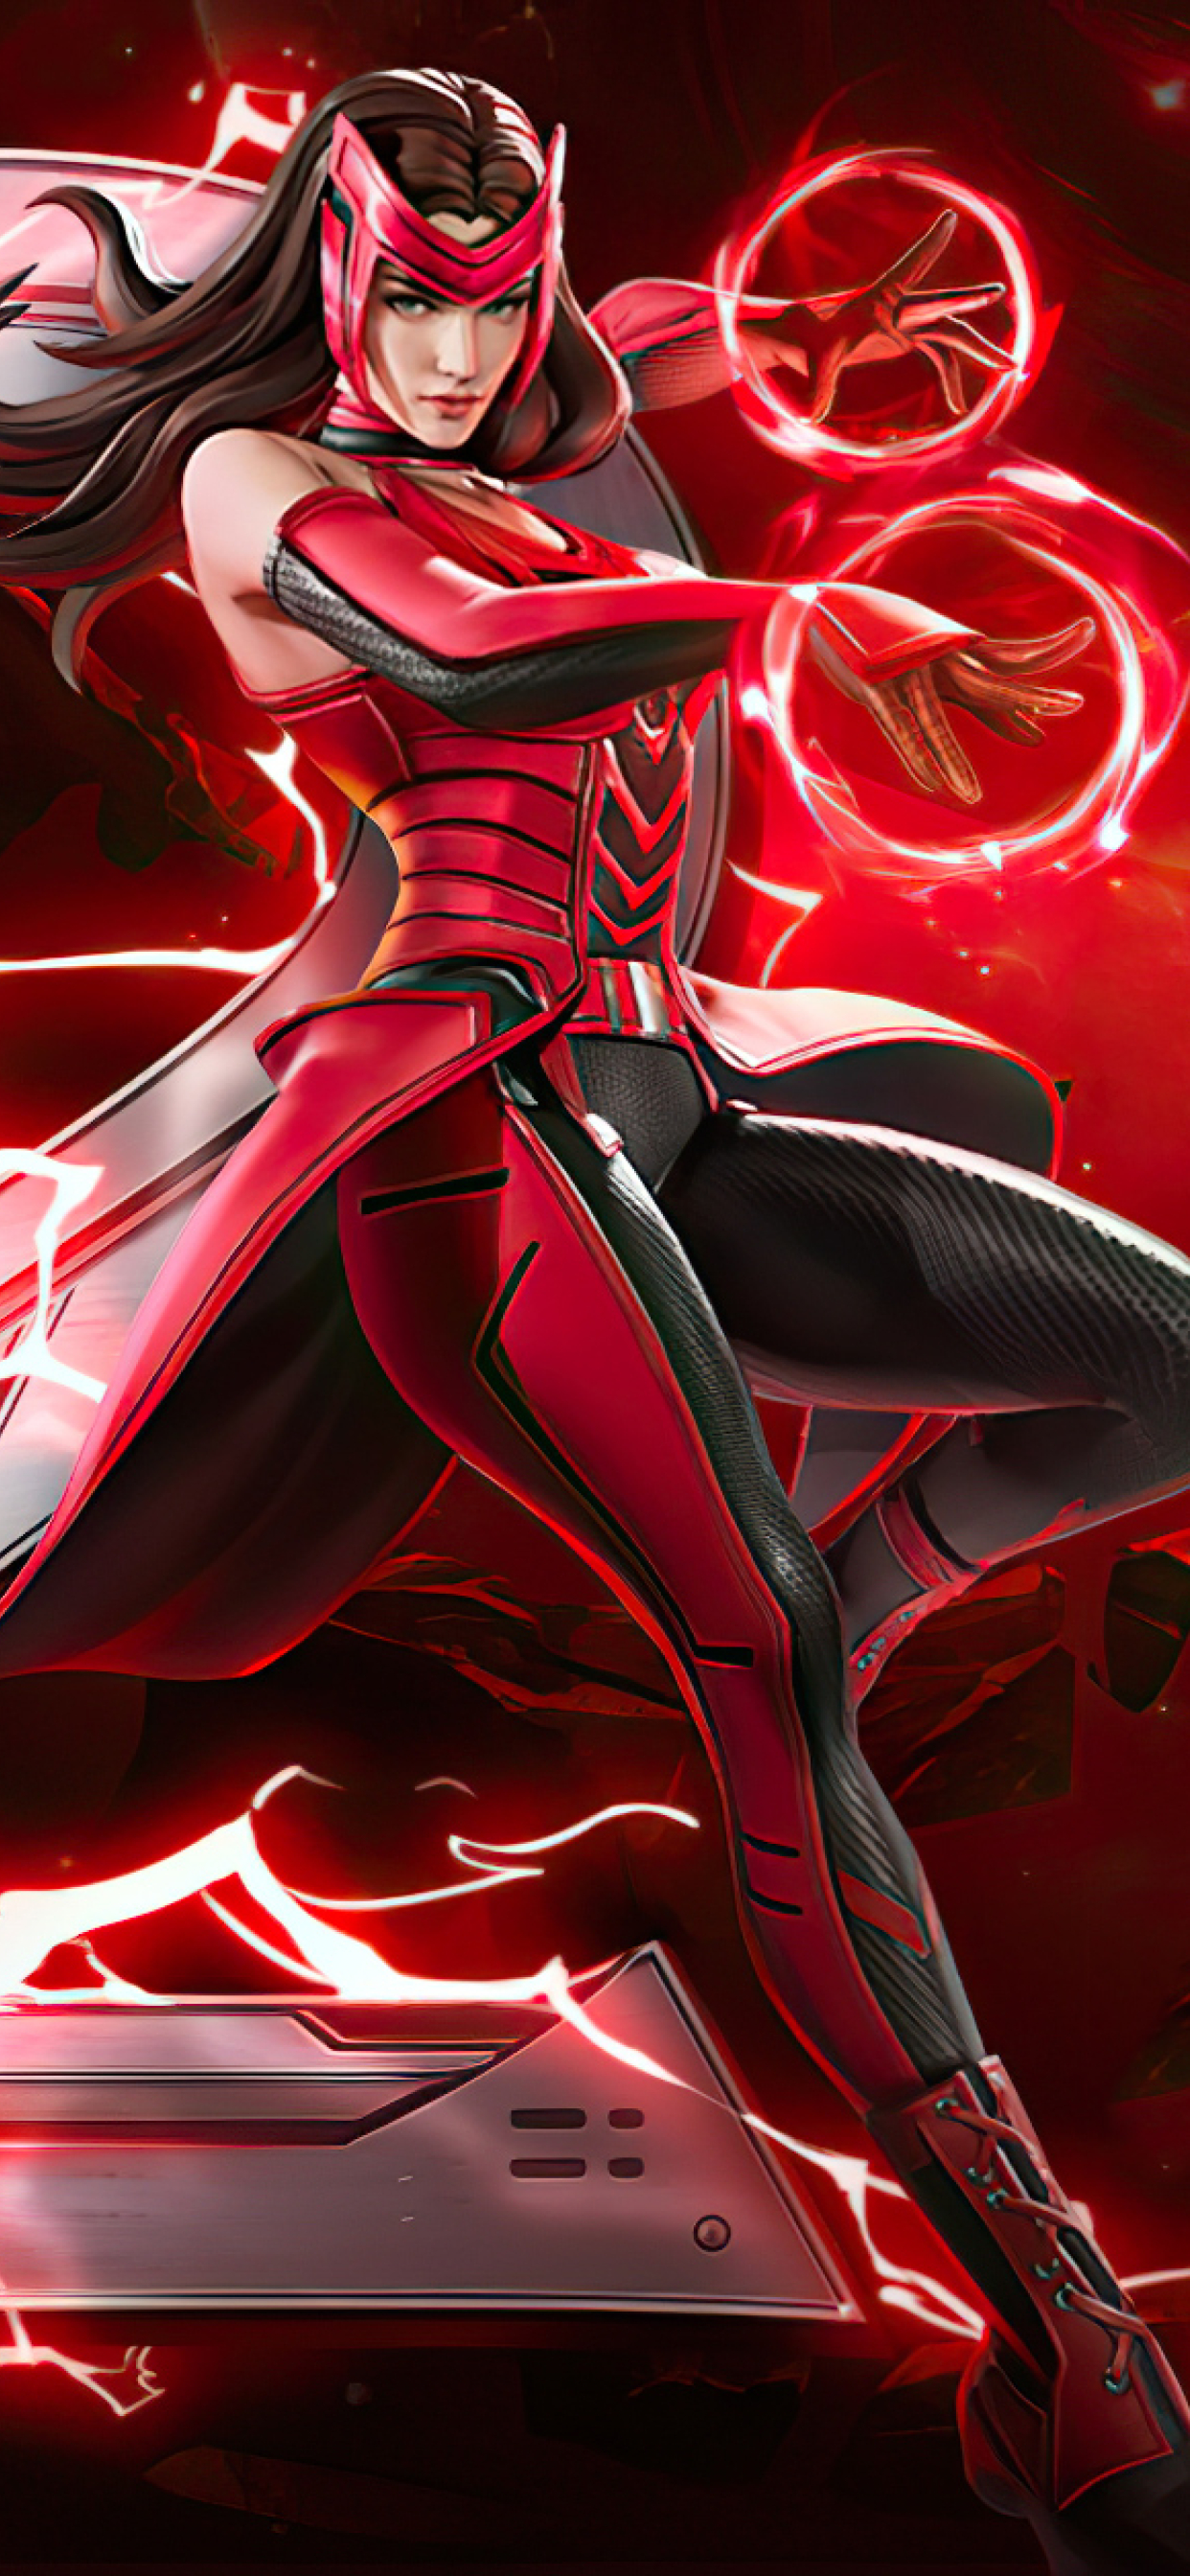 Download wallpaper 840x1336 scarlet witch fan art 2022 iphone 5 iphone  5s iphone 5c ipod touch 840x1336 hd background 27884